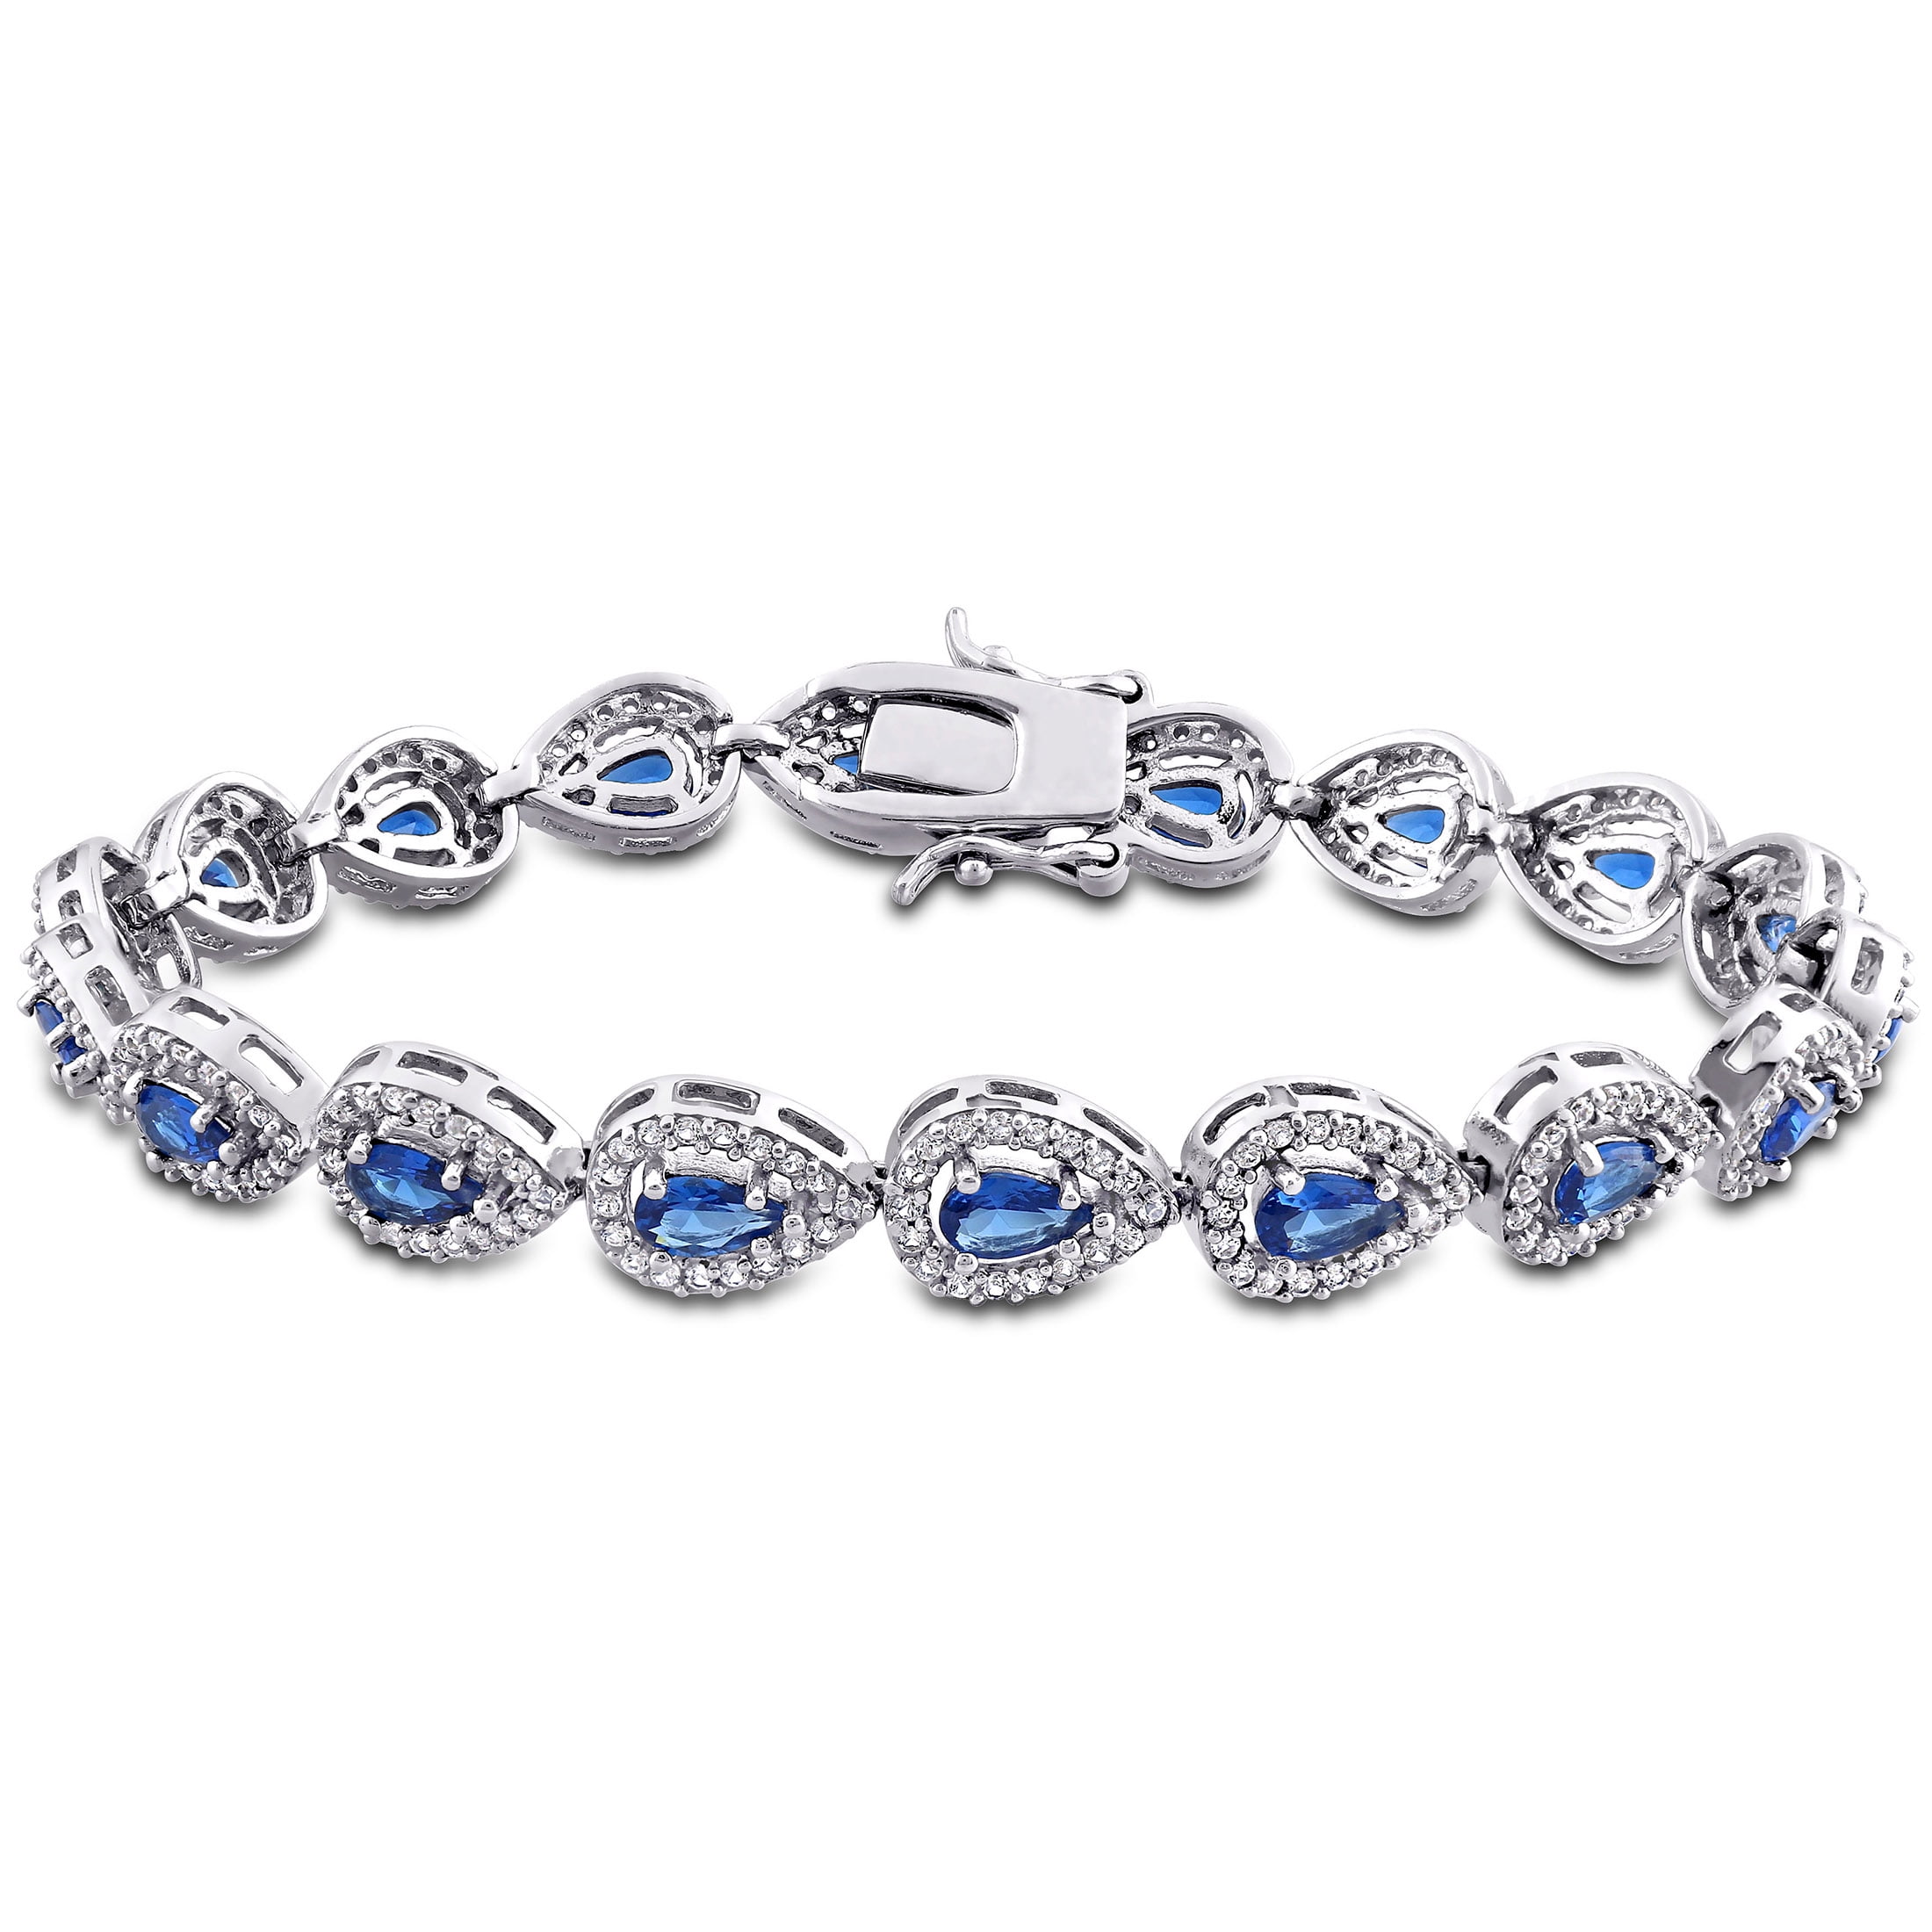 Buy The Real Effect London 800 Sterling Silver Classic Bracelet Online At  Best Price @ Tata CLiQ